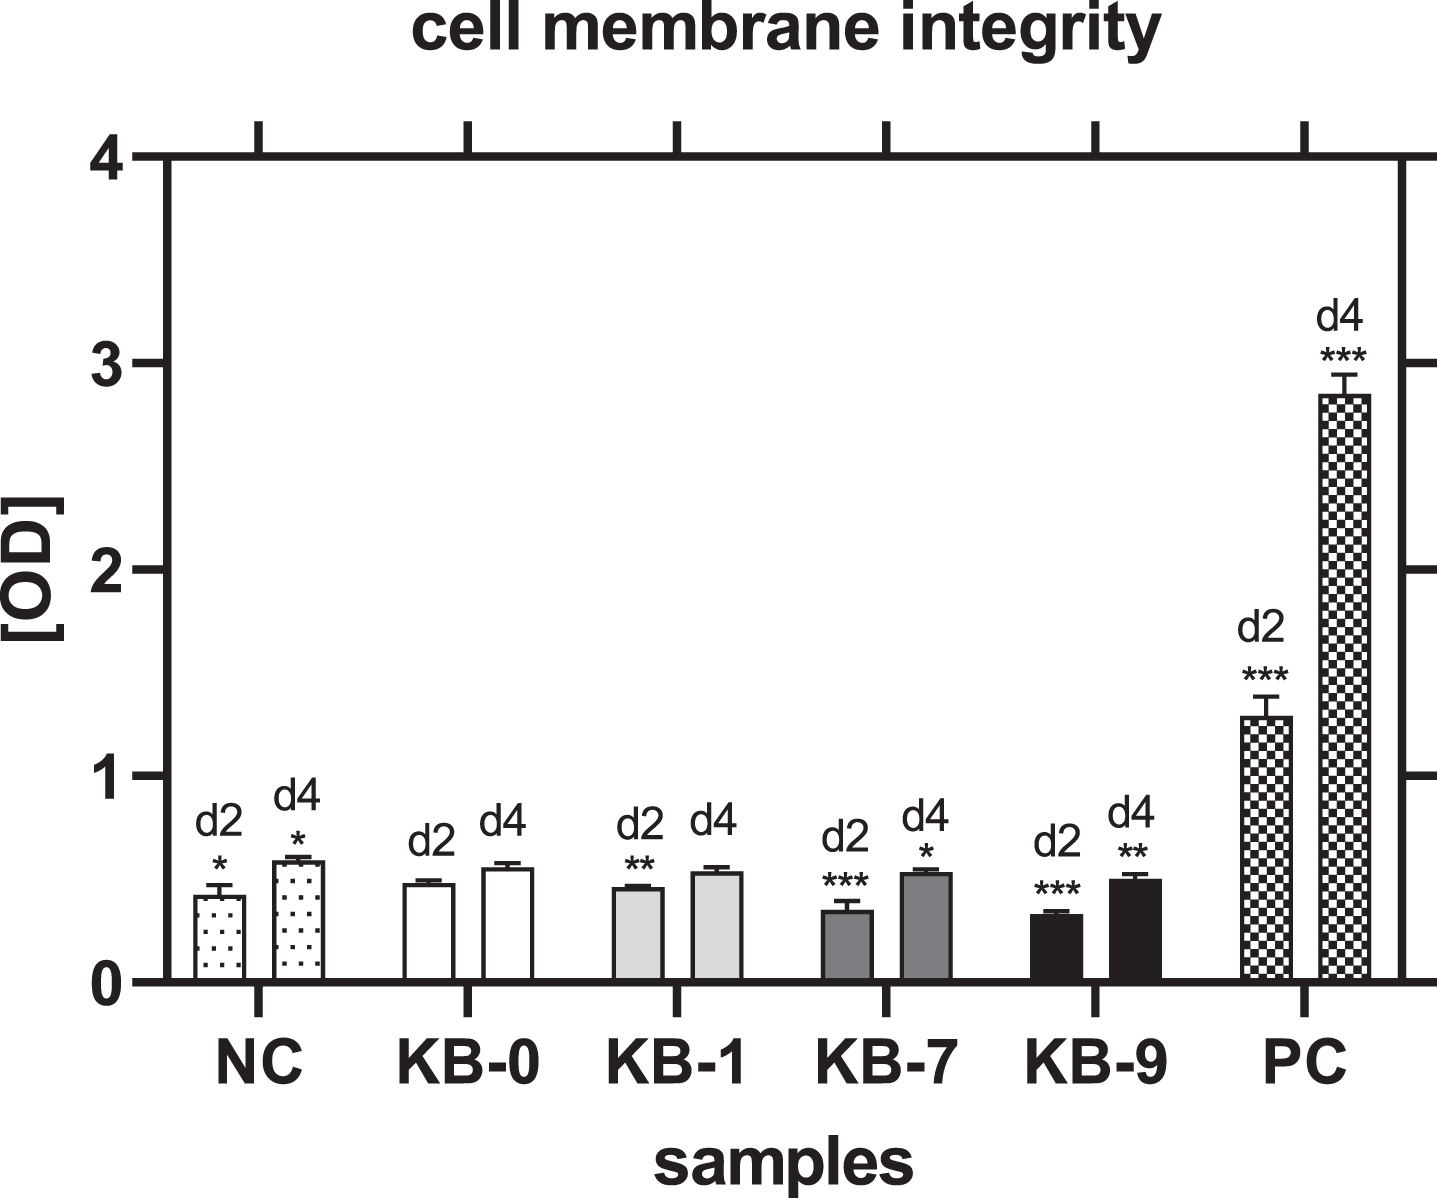 Cell membrane integrity of CHO cells on TCP (NC), KB-0, KB-1, KB-7 and KB-9 two and four days after cell seeding. Shown are arithmetic mean±standard deviation of n = 6. Statistical significance was analyzed using t-test analysis compared to KB-0..*: p < 0.05, **: p < 0.01, ***: p < 0.001.